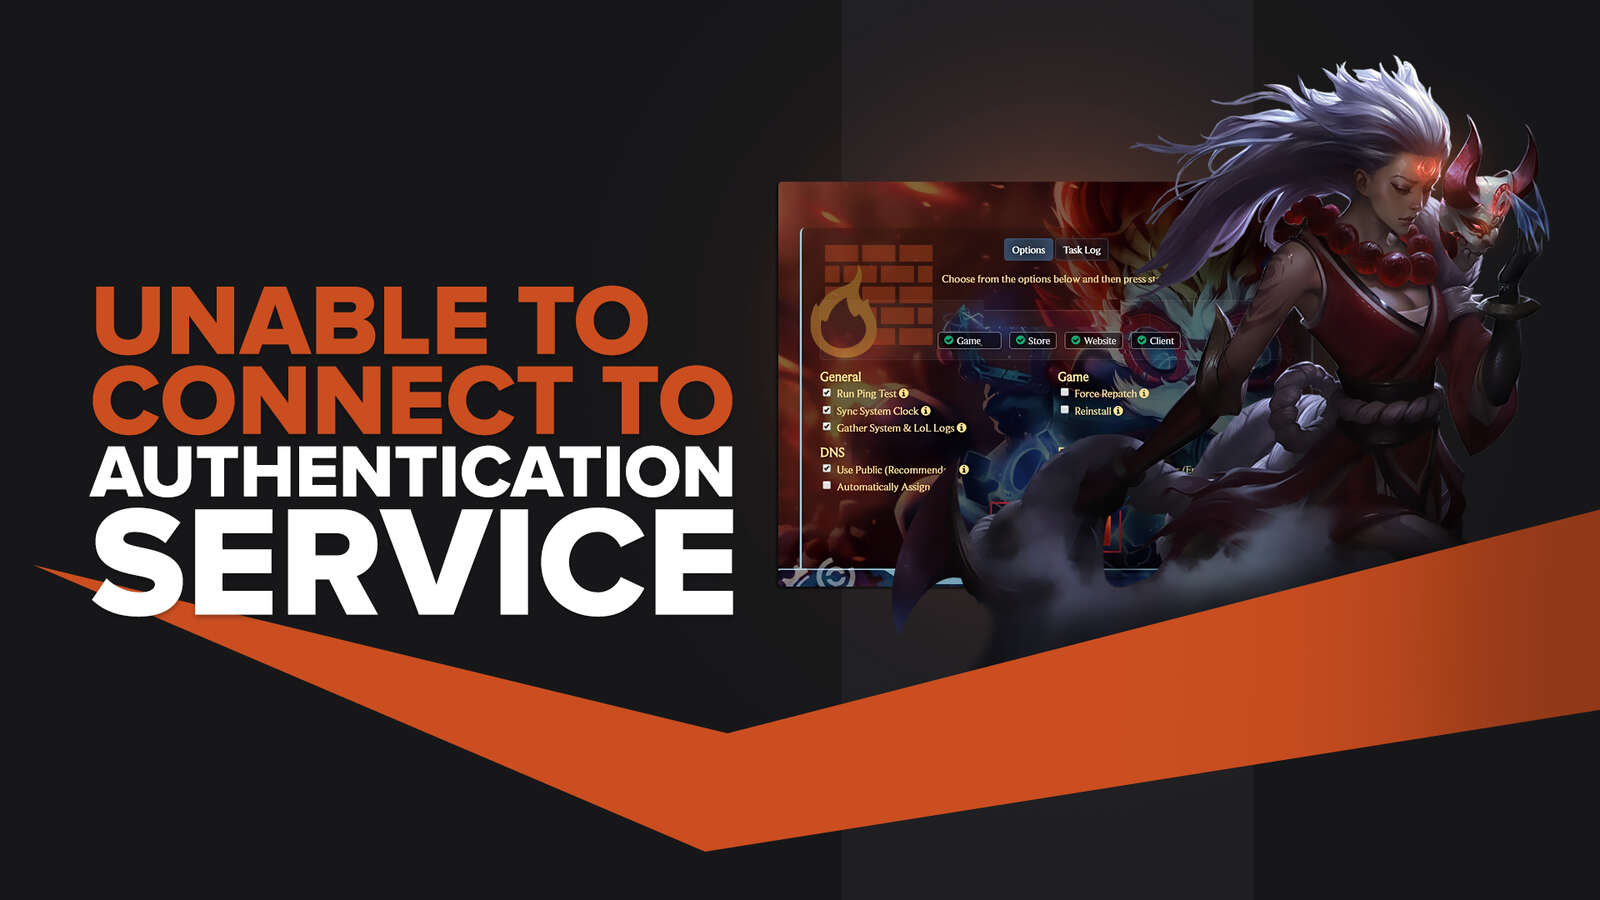 League of Legends: “Unable to connect to authentication service”